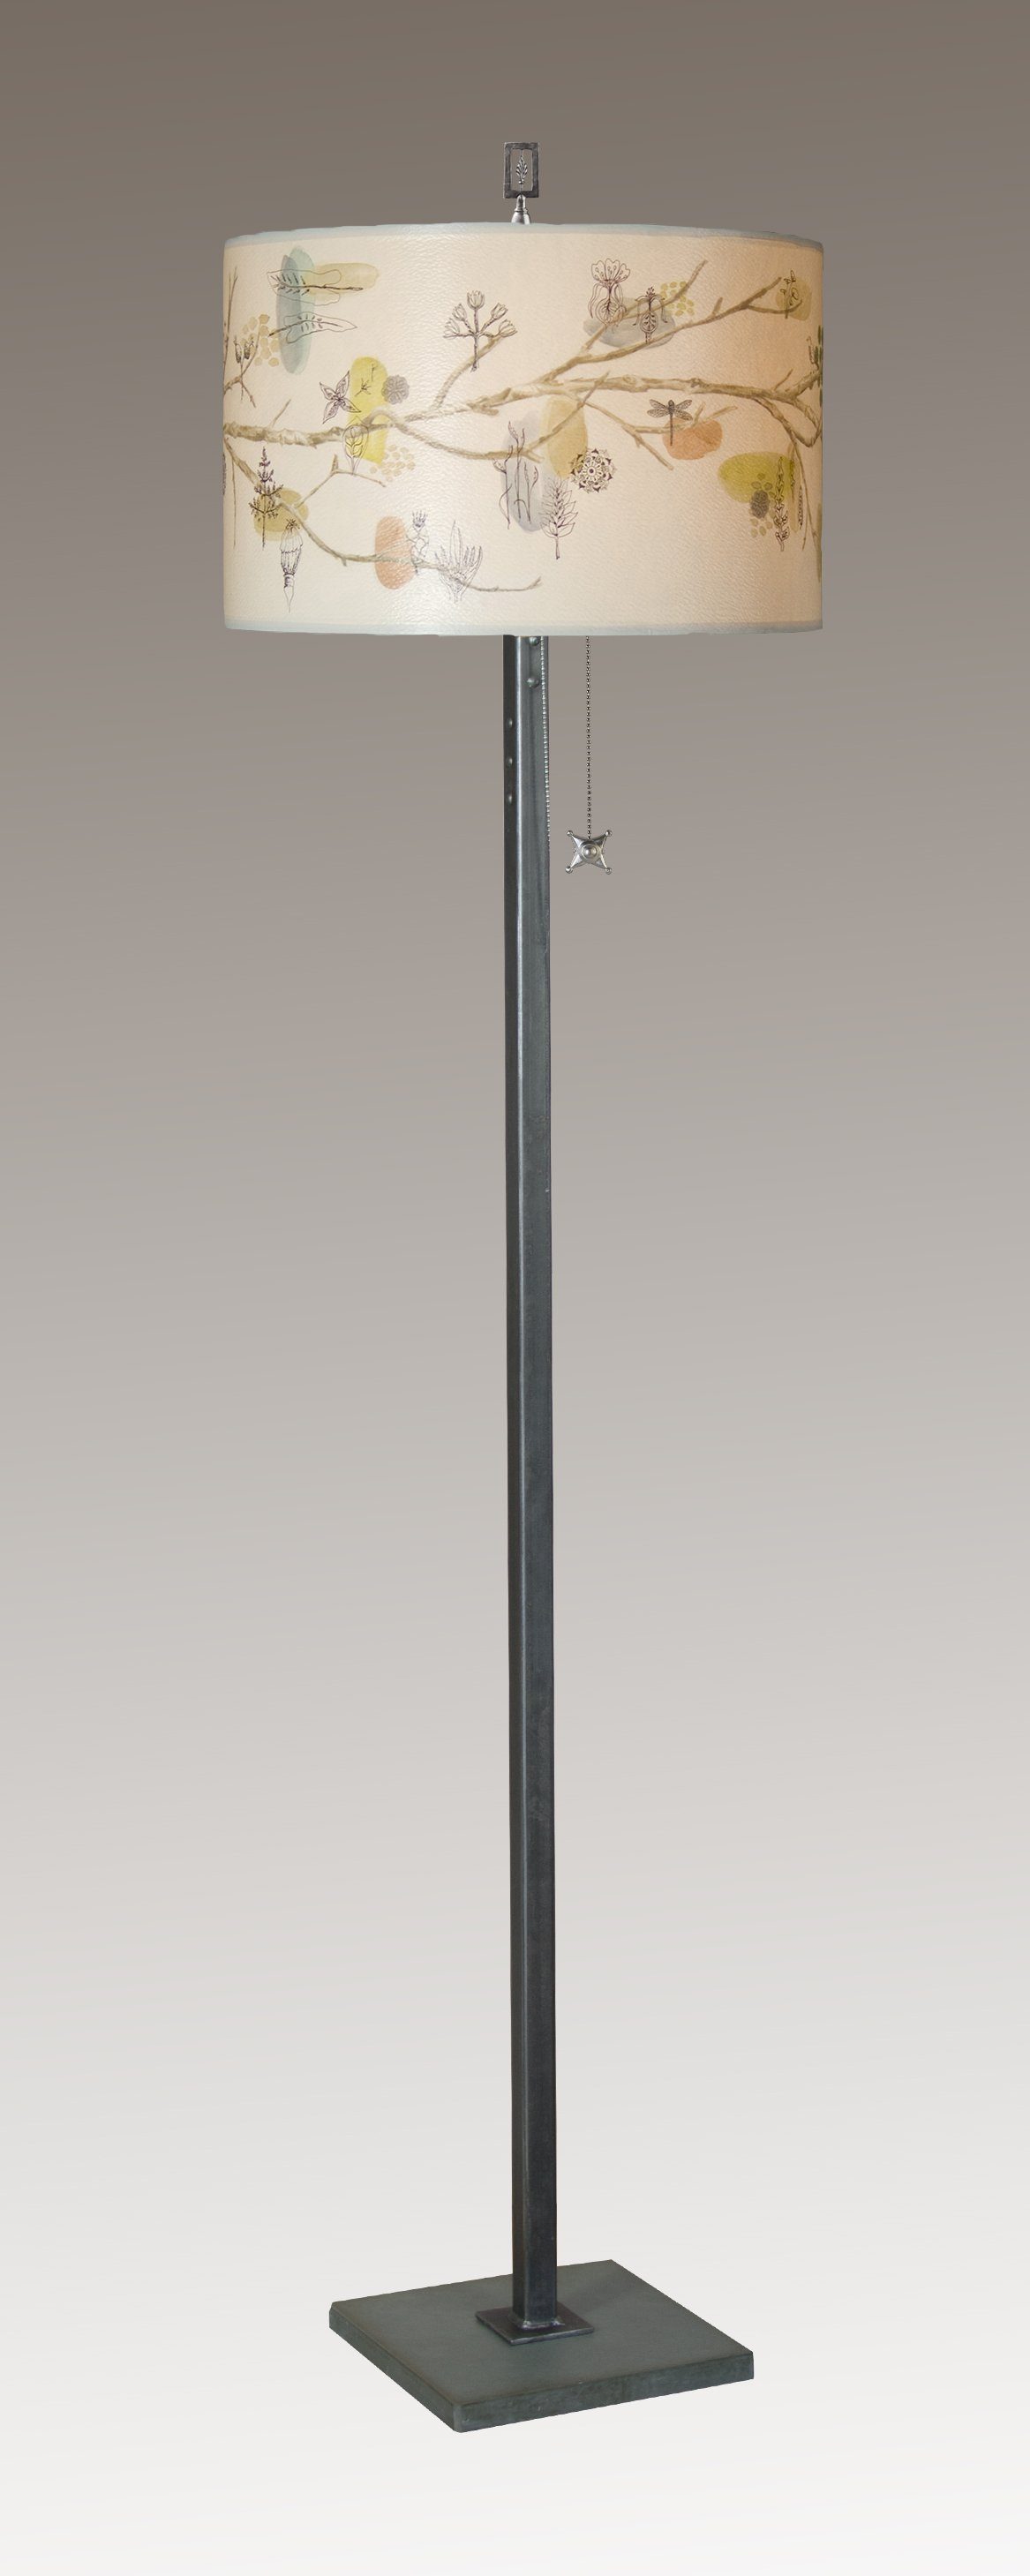 Steel Floor Lamp with Large Drum Shade in Artful Branch